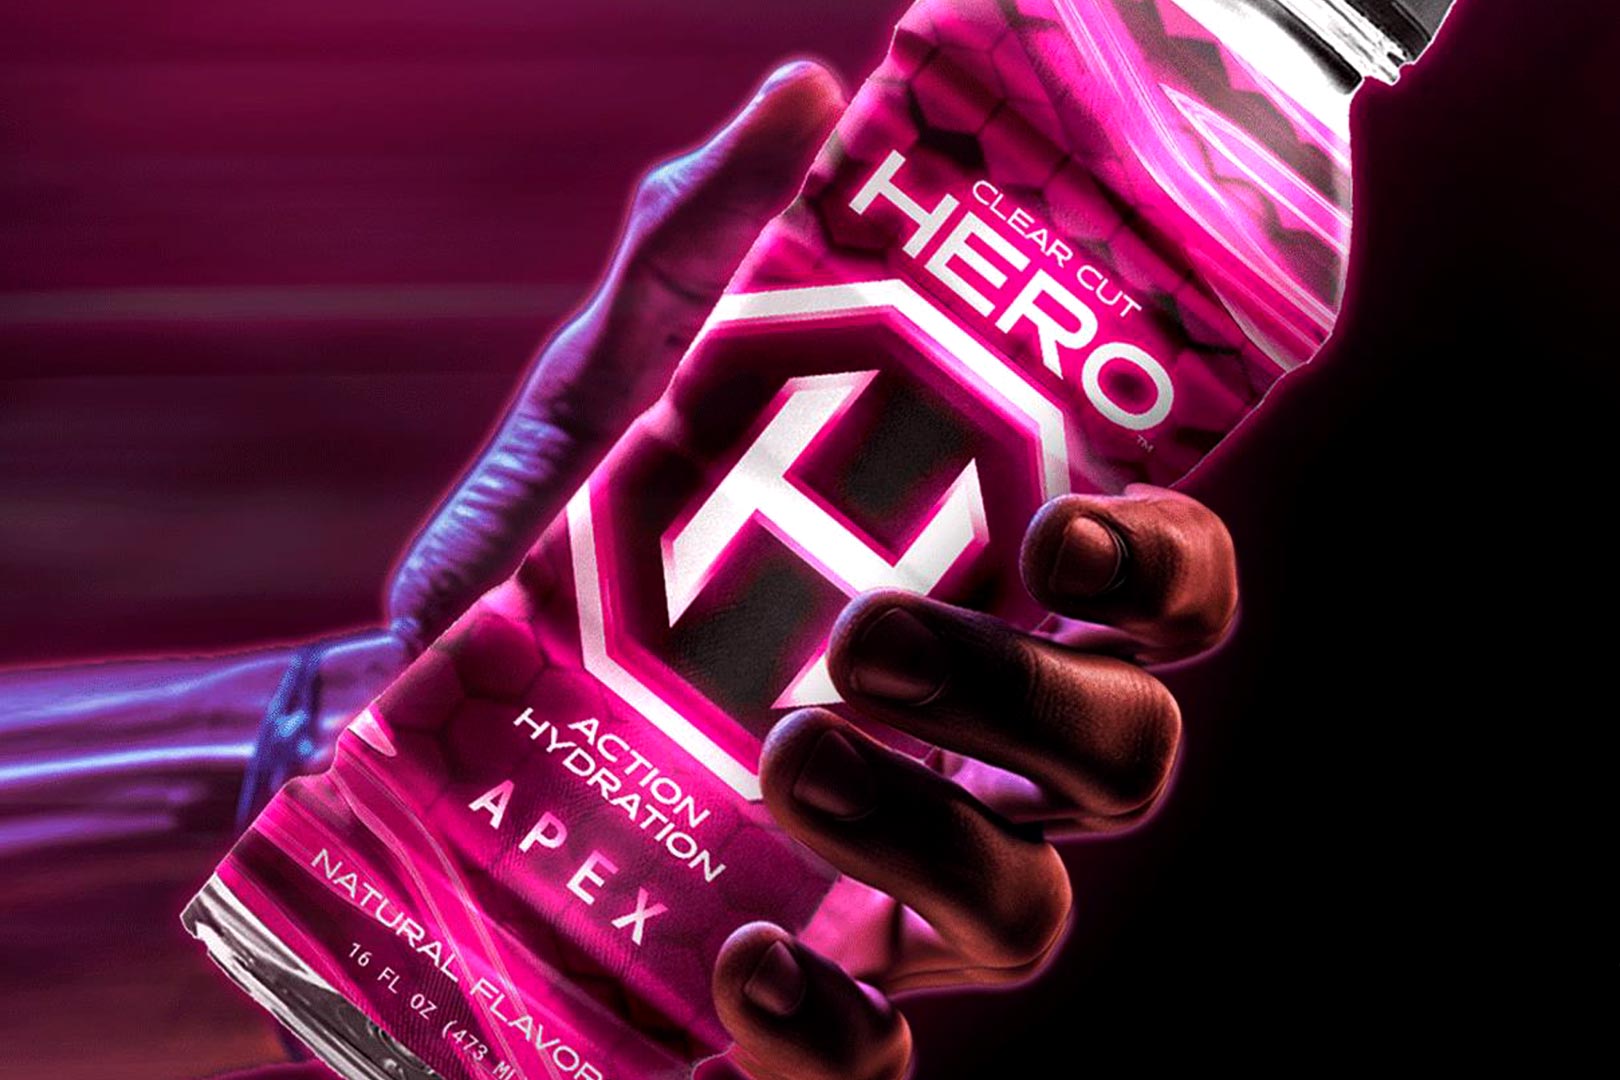 Clear Cut Hero Action Hydration